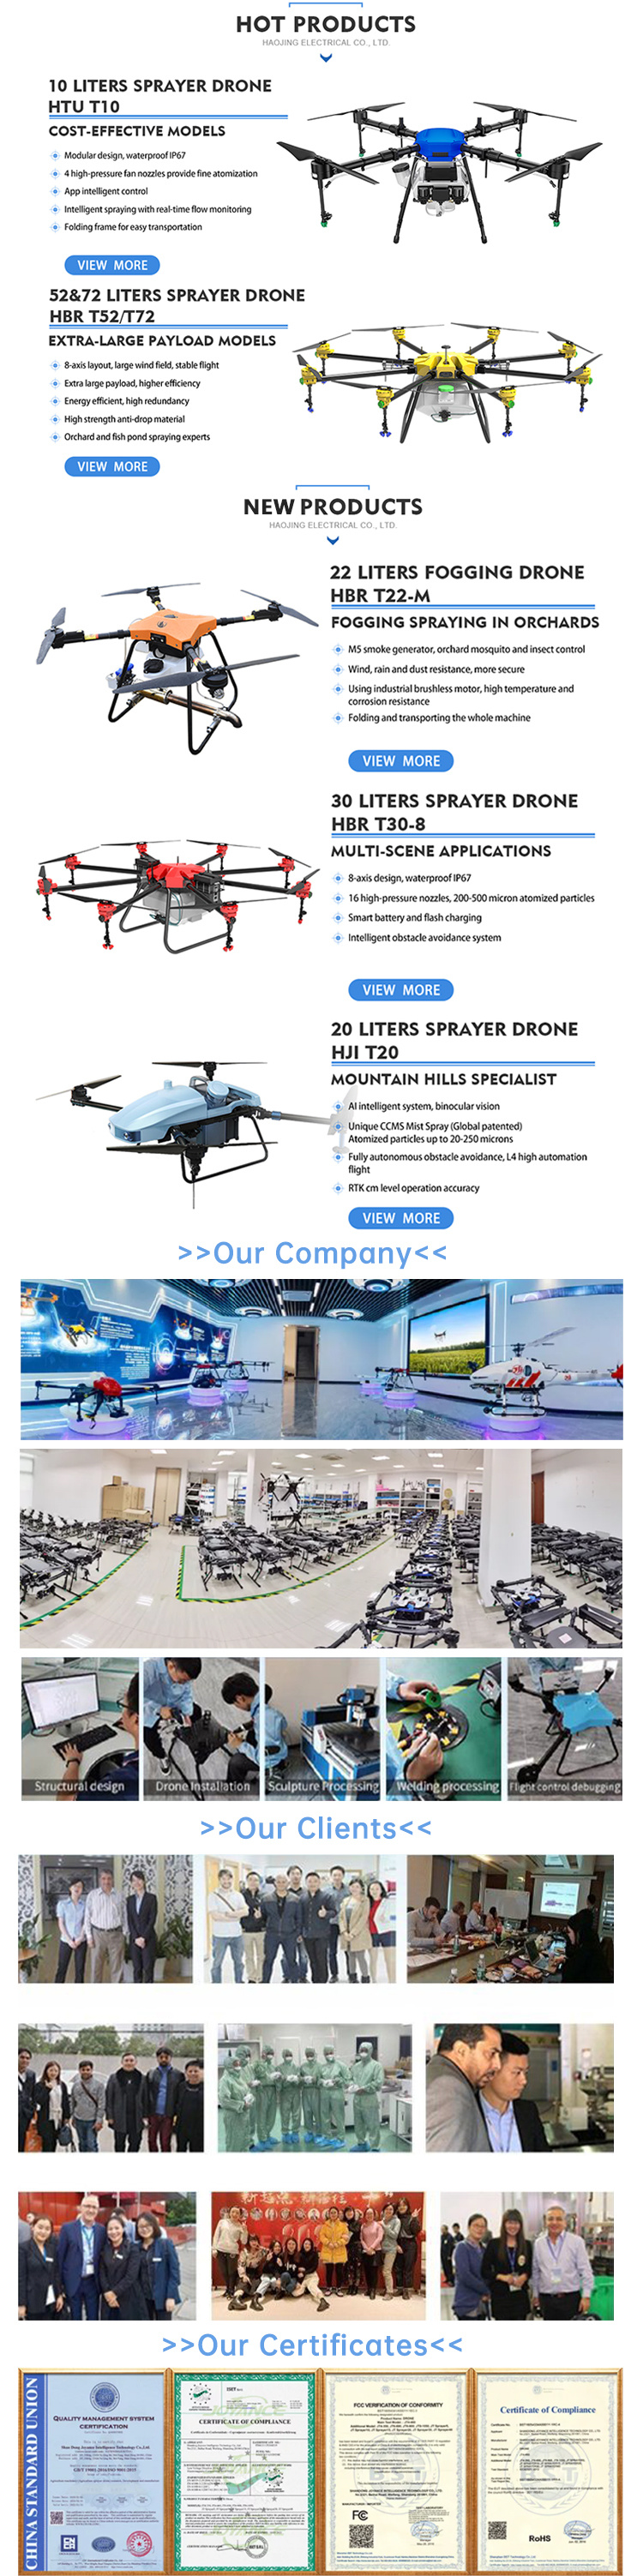 Low Consumption 10L Rtk Payload Disinfection Intelligent Spraying Drone for Pesticides Crop Spraying